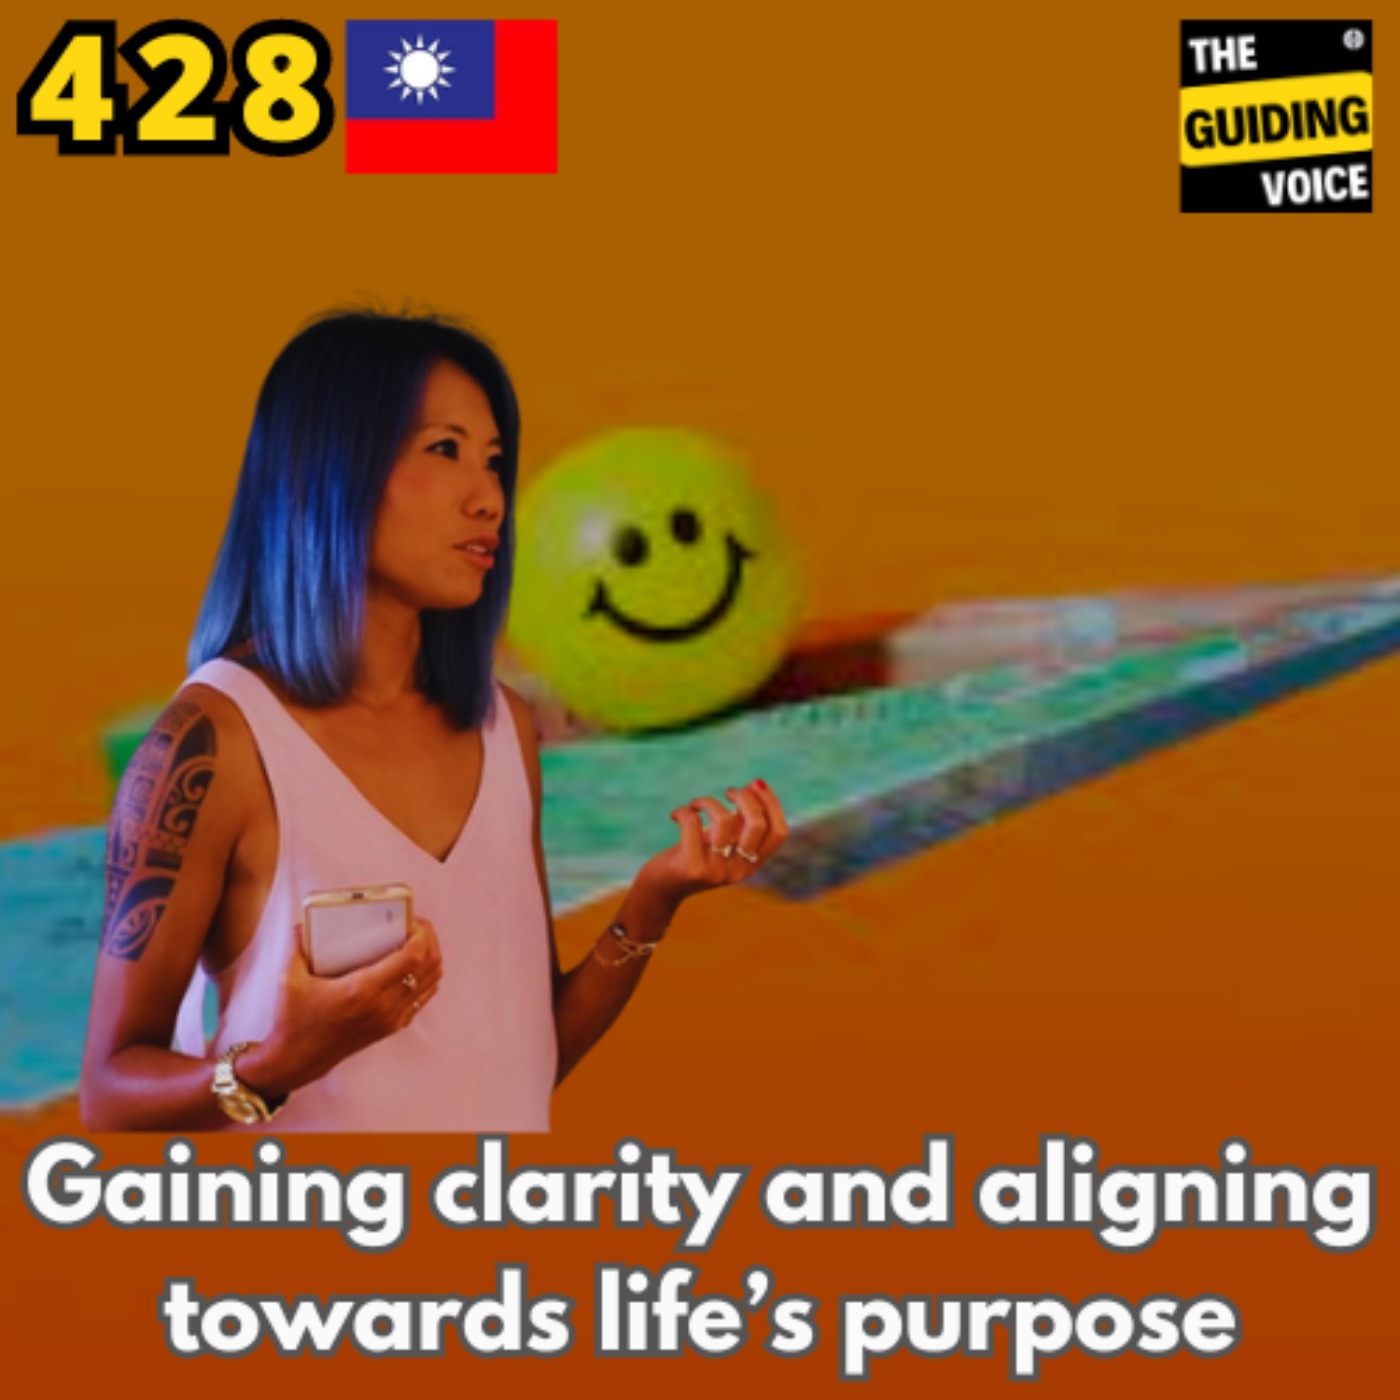 Gaining clarity and aligning towards life’s purpose | #TGVGlobalSpeakerFestival | Shuang Min Chan | #TGV428